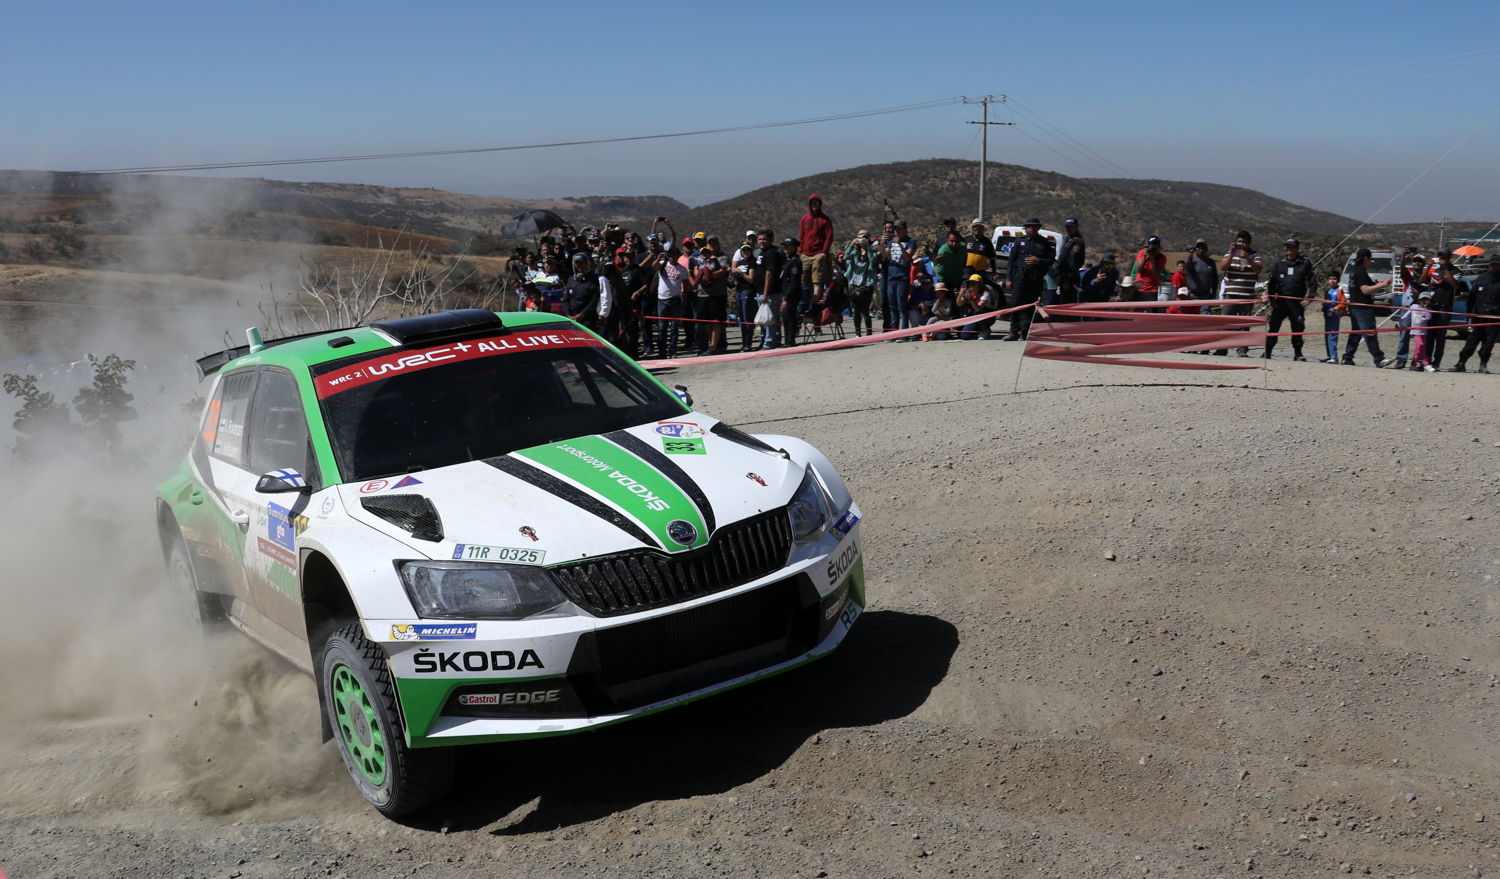 After re-starting Kalle Rovanperä and co-driver Jonne Halttunen (FIN/FIN) powered their ŠKODA FABIA R5 to four WRC 2 stage wins and moved up to 5th place of the category